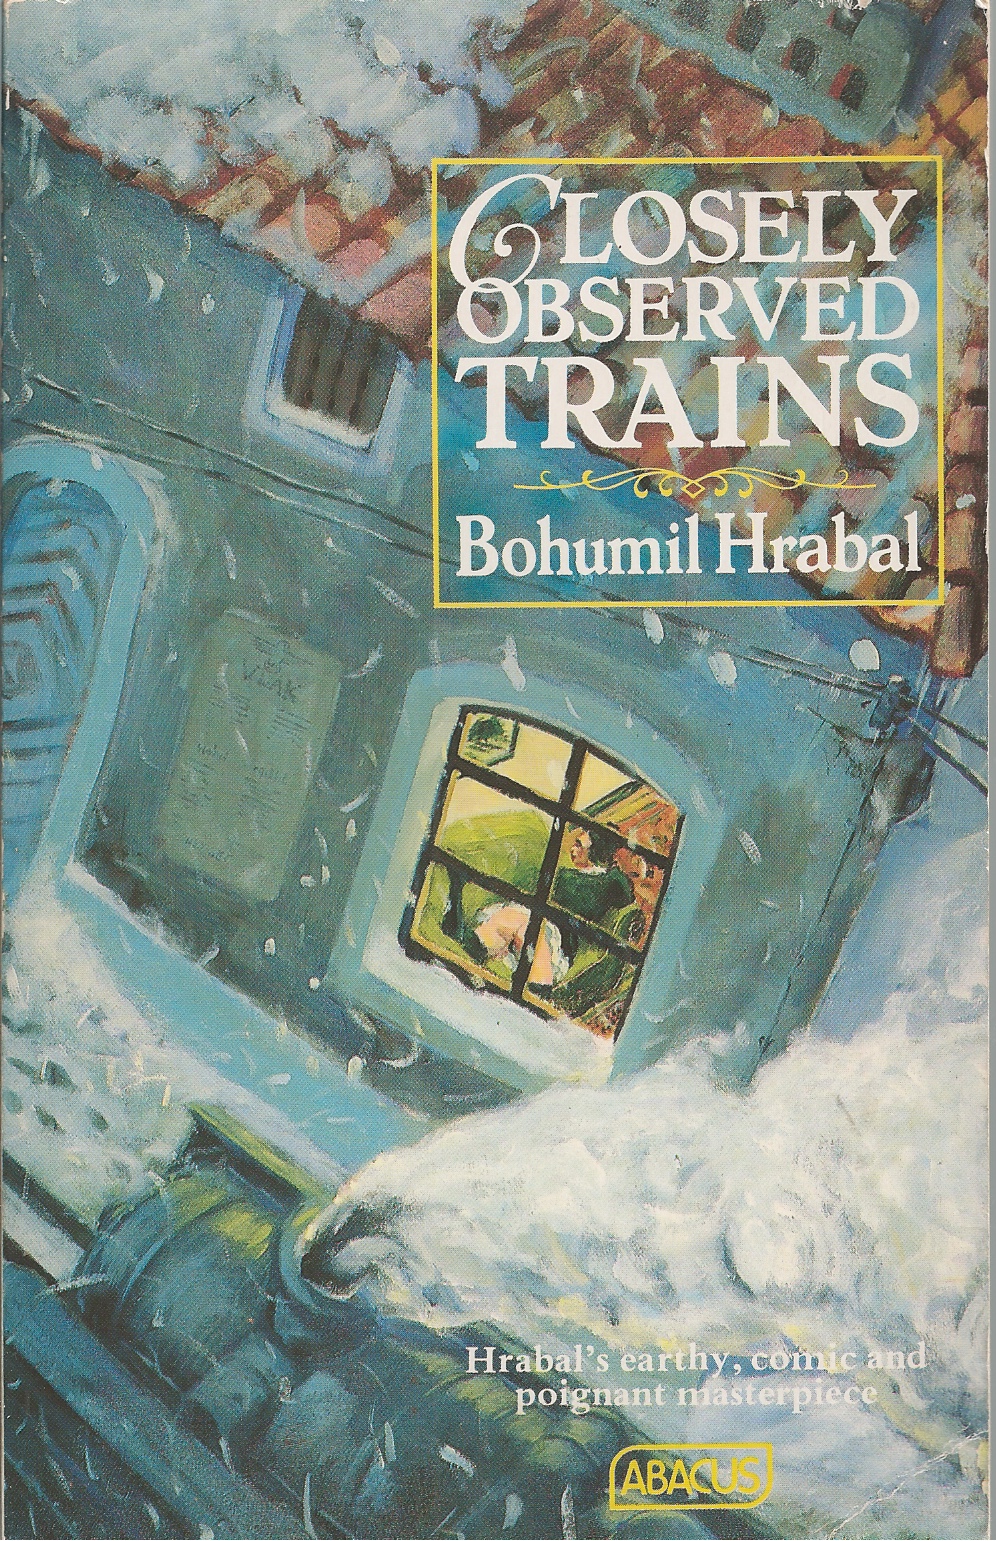 HRABAL, BOHUMIL - Closely Observed Trains